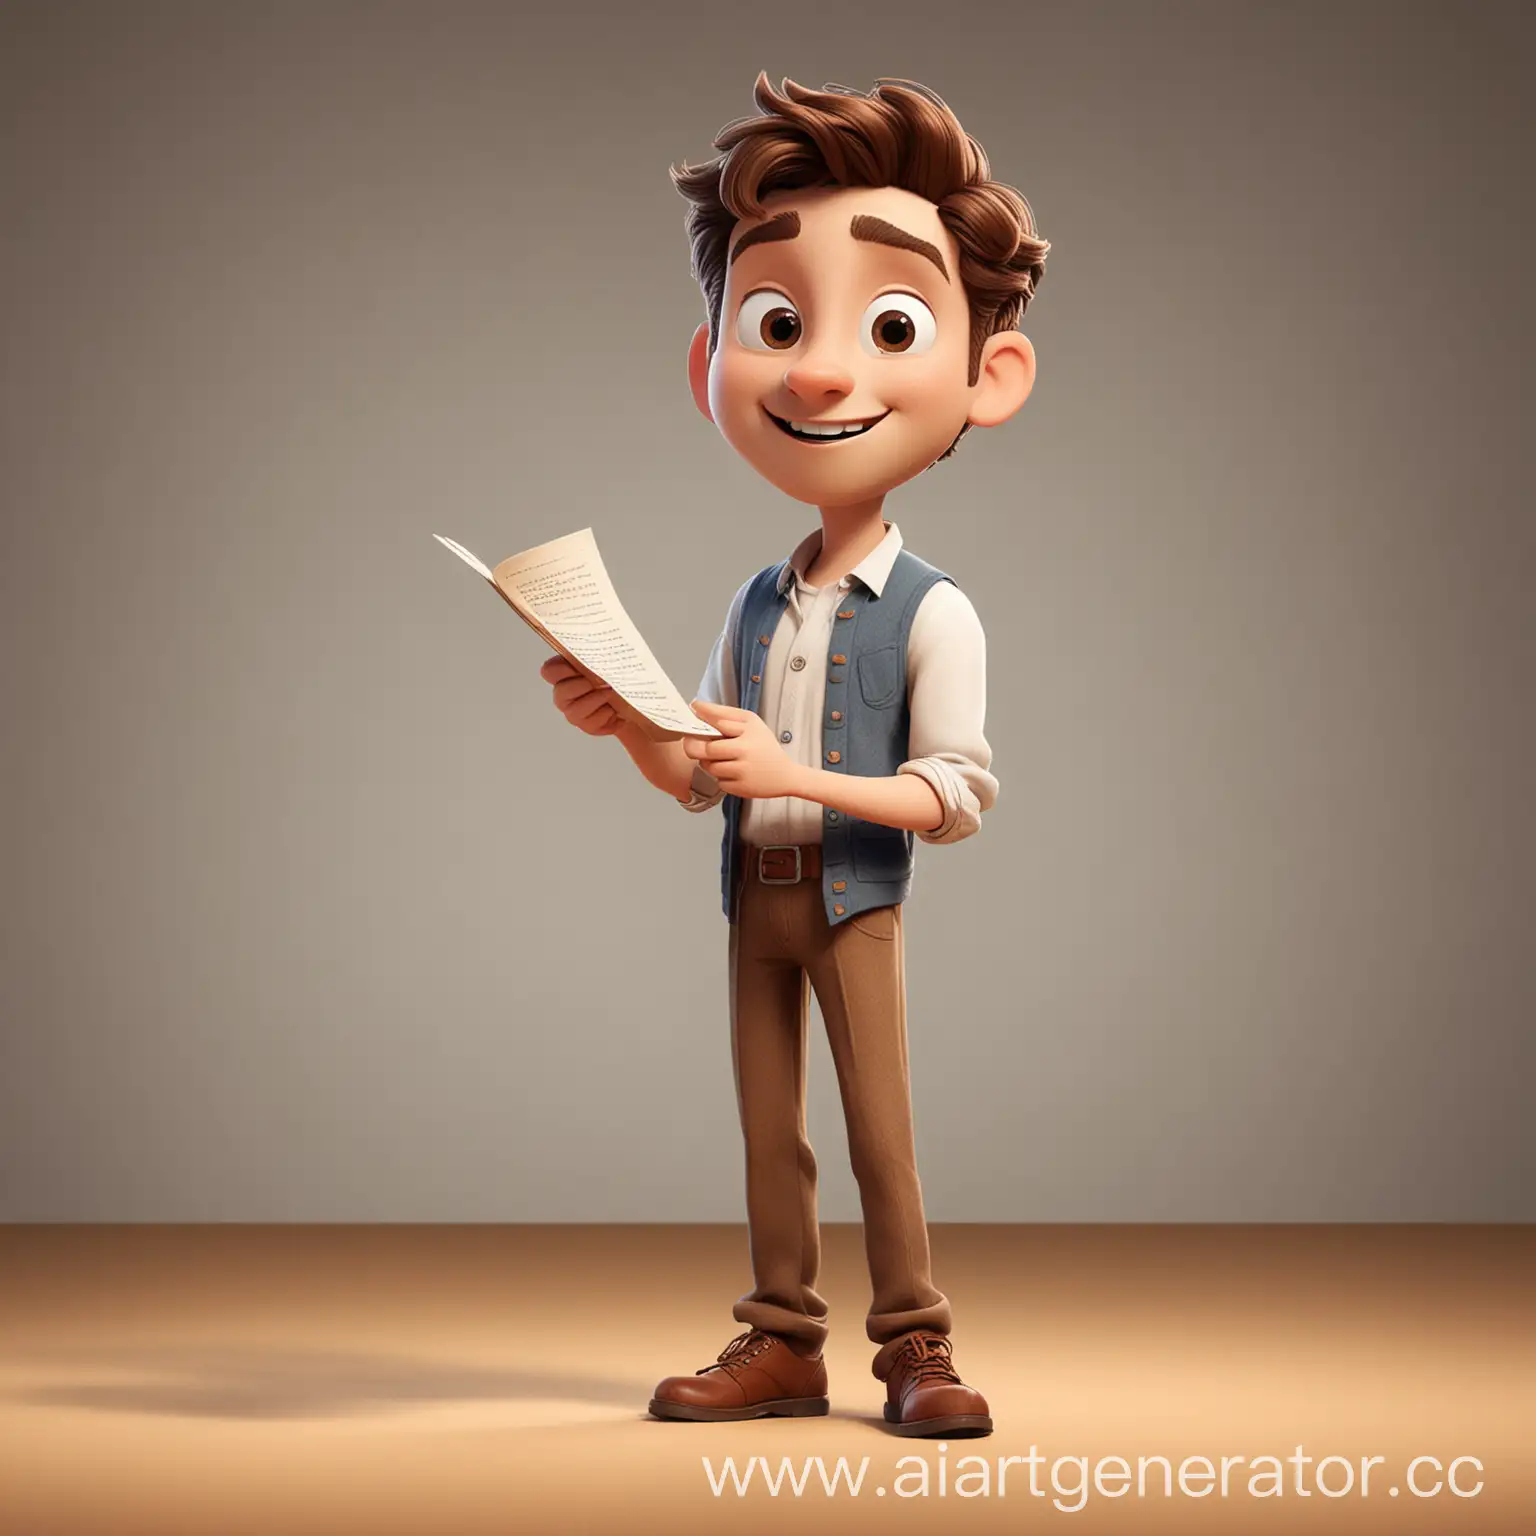 Cute-Cartoon-Actor-Rehearsing-with-Script-on-Stage